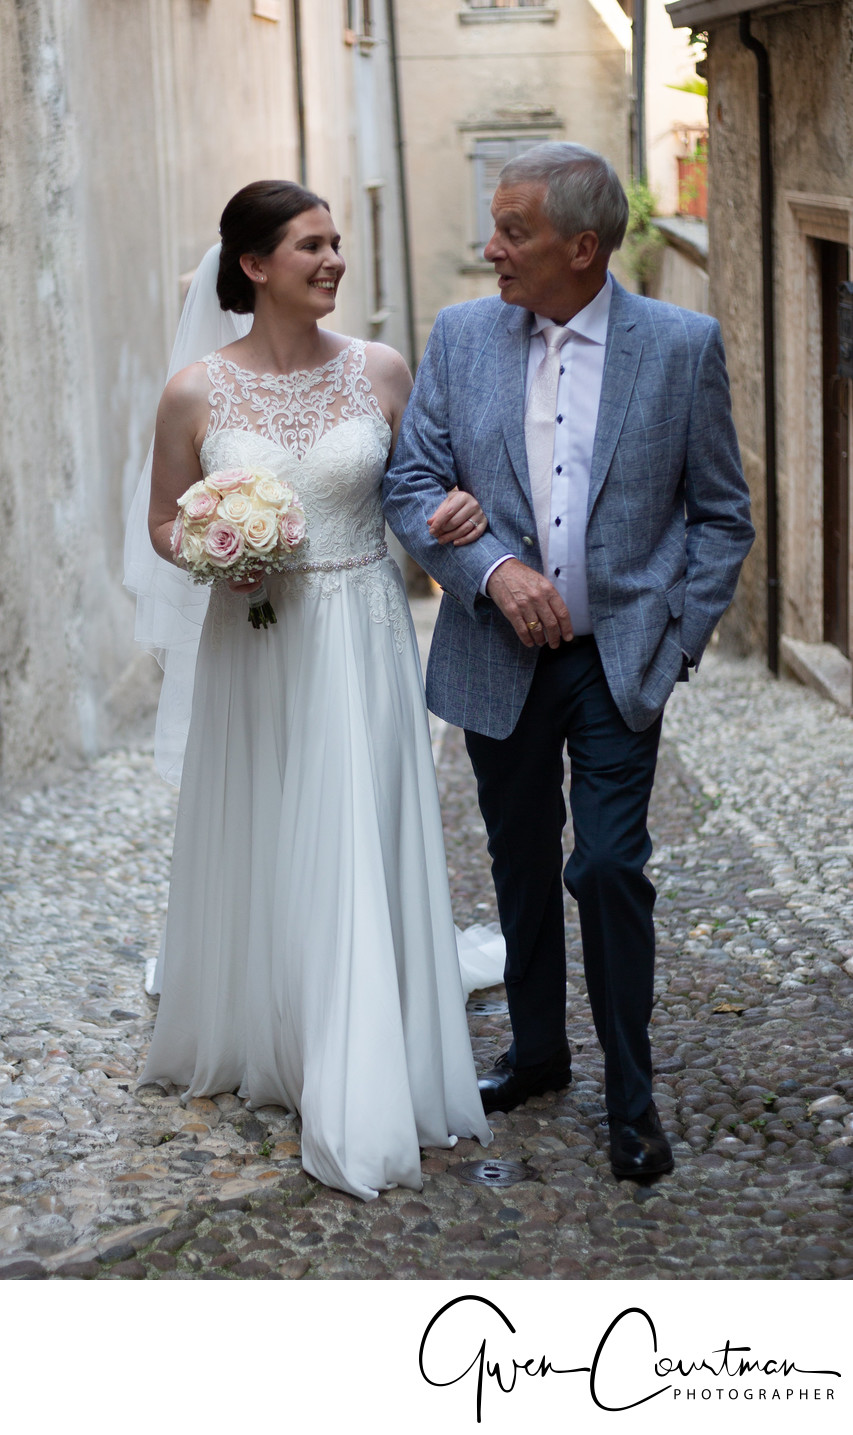 Penny and her dad in the streets of Malcesine.